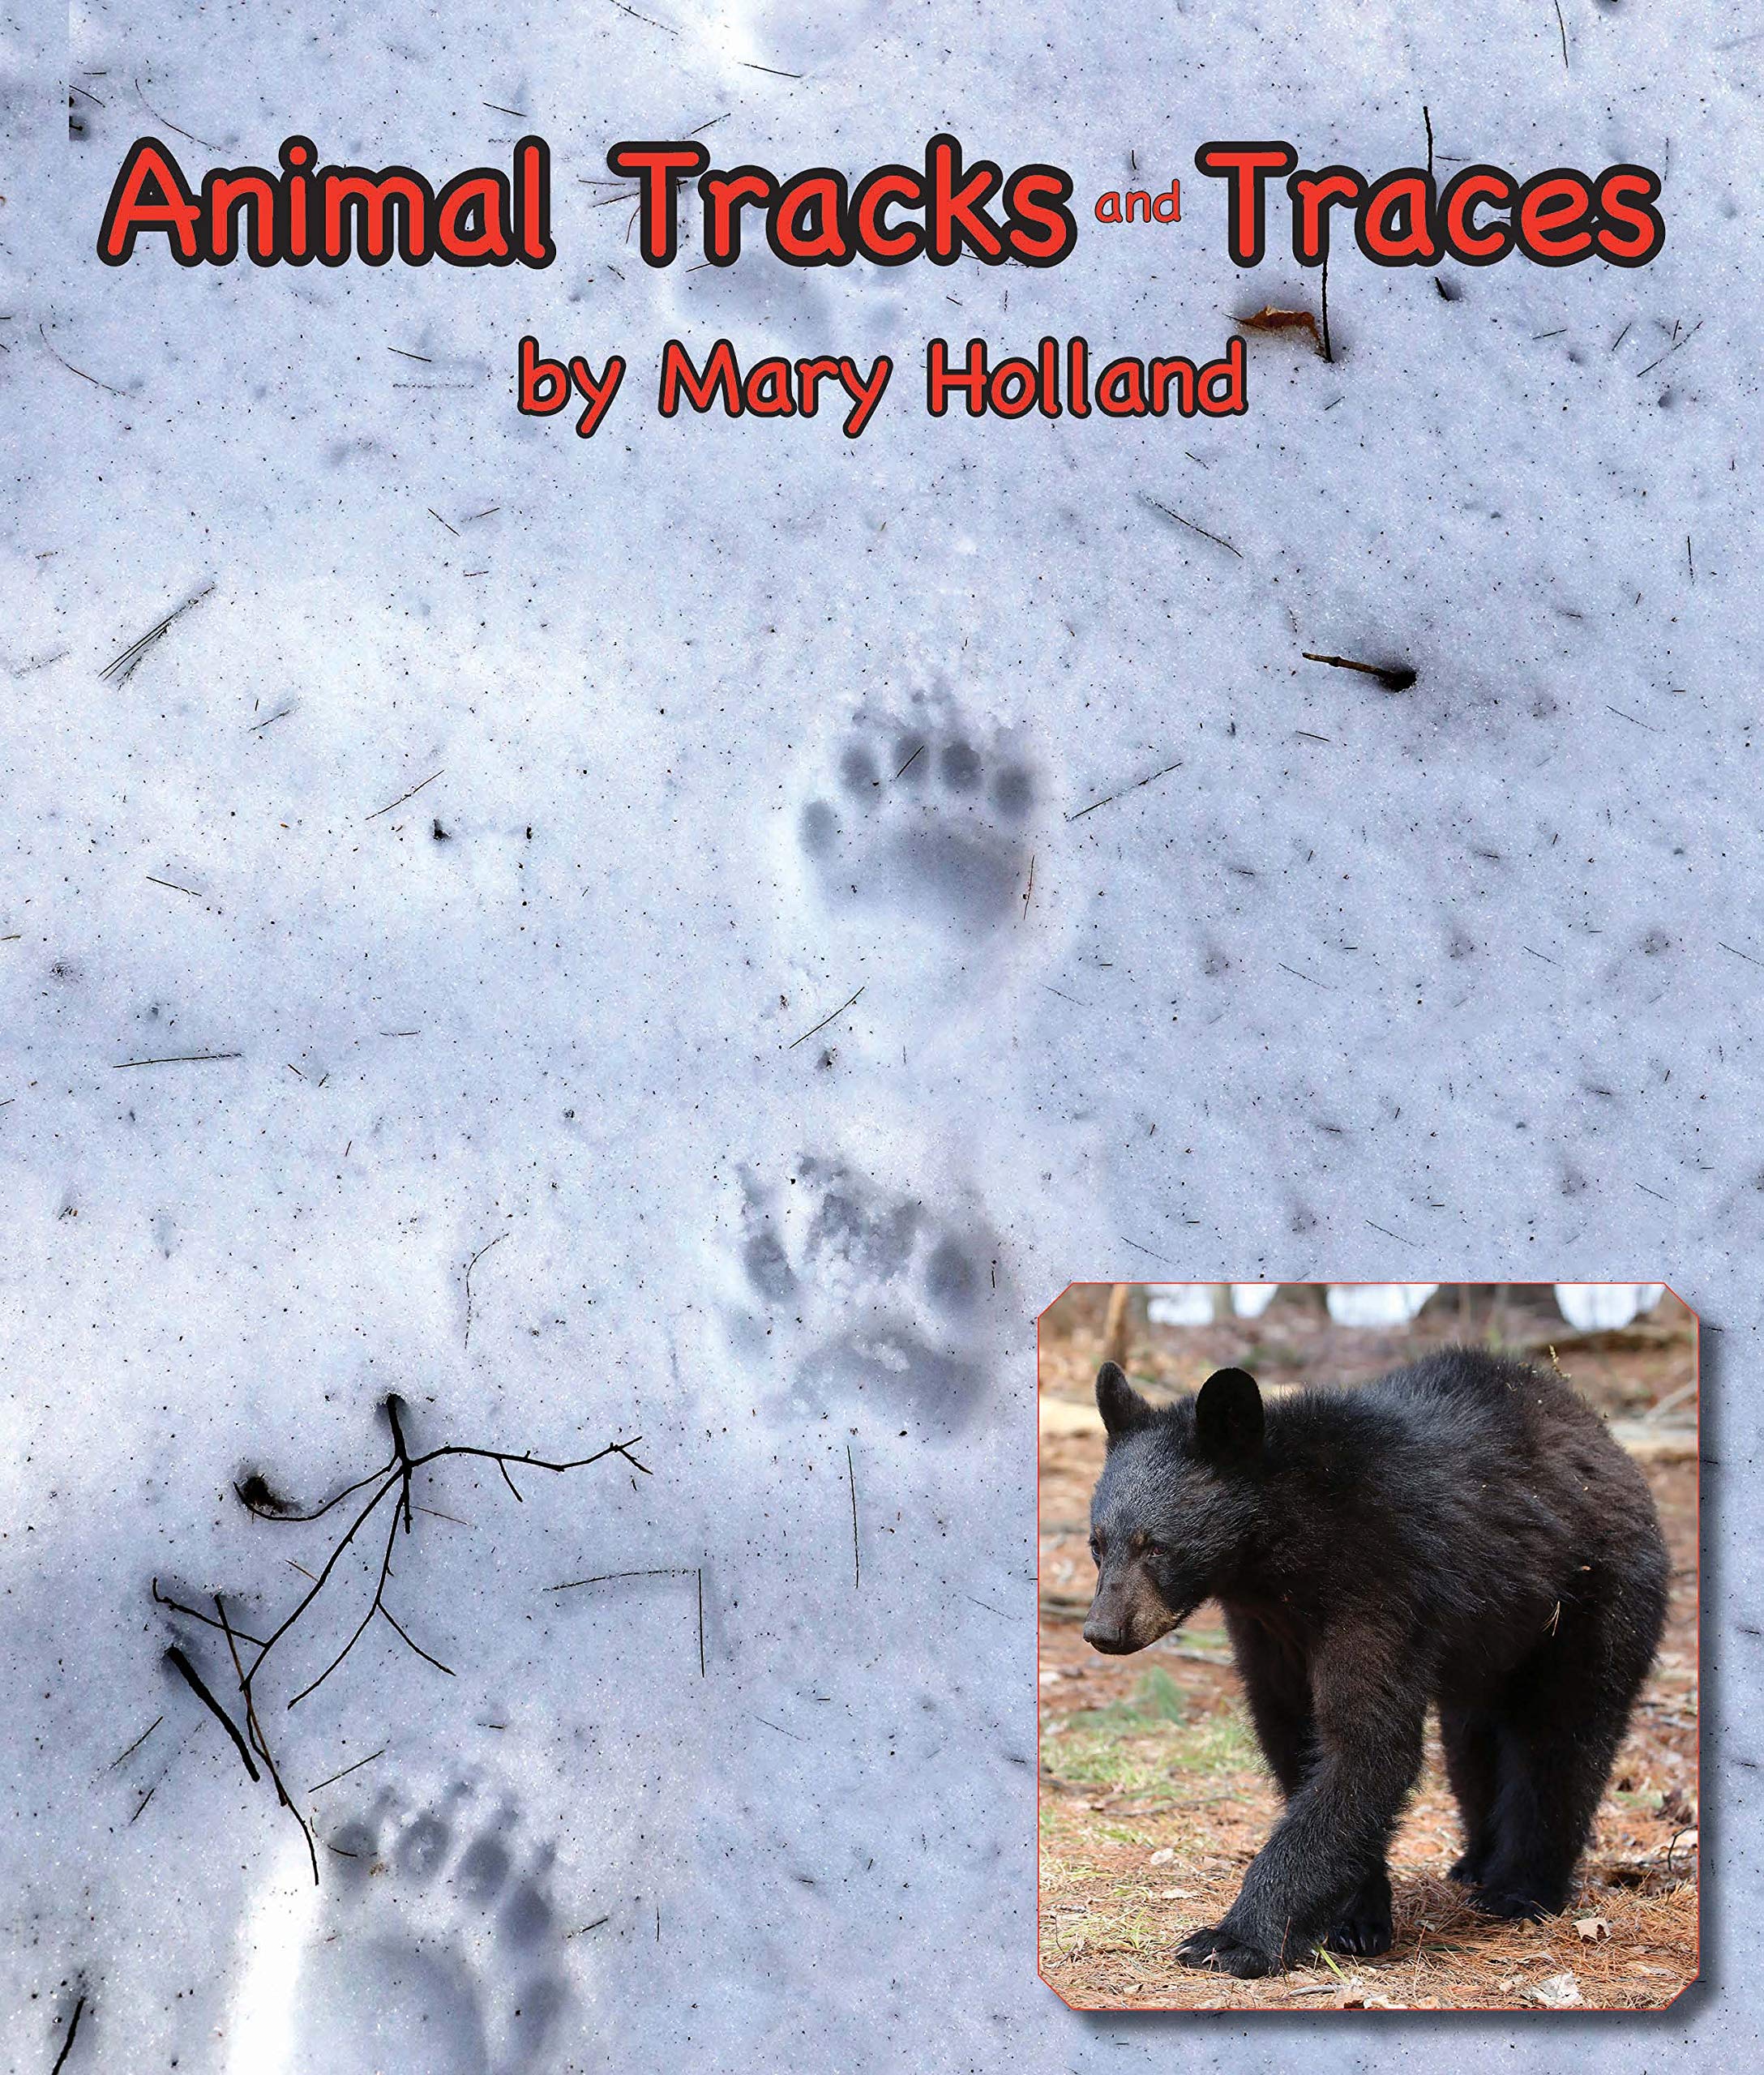 Animal Tracks and Traces | Seattle Book Review